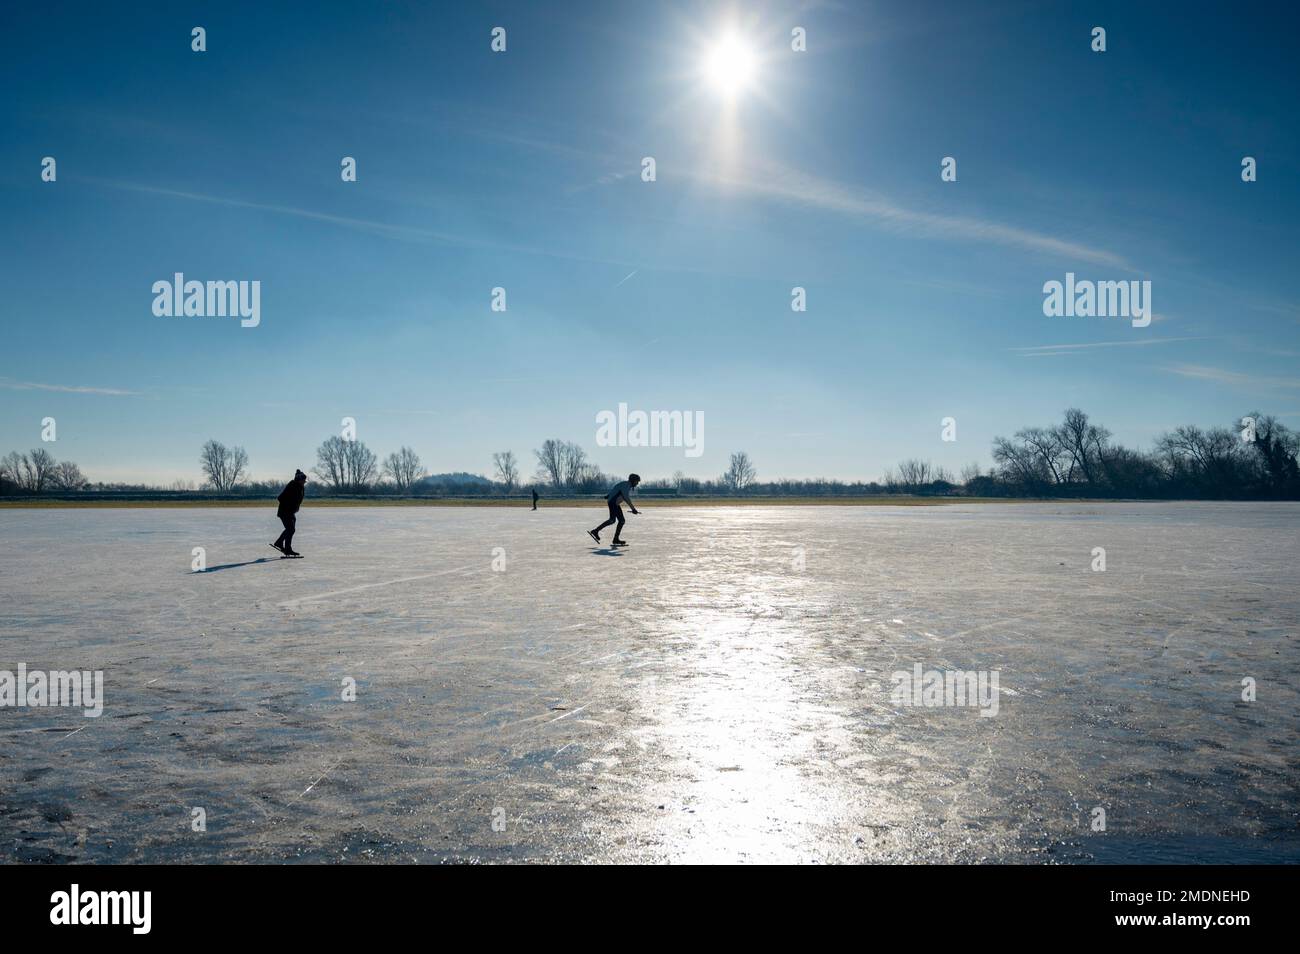 Bluntisham, Cambridgeshire, UK. 23rd Jan, 2023. People enjoy the cold snap with some fen skating in sunshine as the cold winter weather continues. Ice skating in the fens is a popular pastime as the shallow flooded flat fields can freeze to allow safe skating. This is the first winter for about 10 years when sharp overnight frosts have lasted long enough to allow the water to freeze. Credit: Julian Eales/Alamy Live News Stock Photo